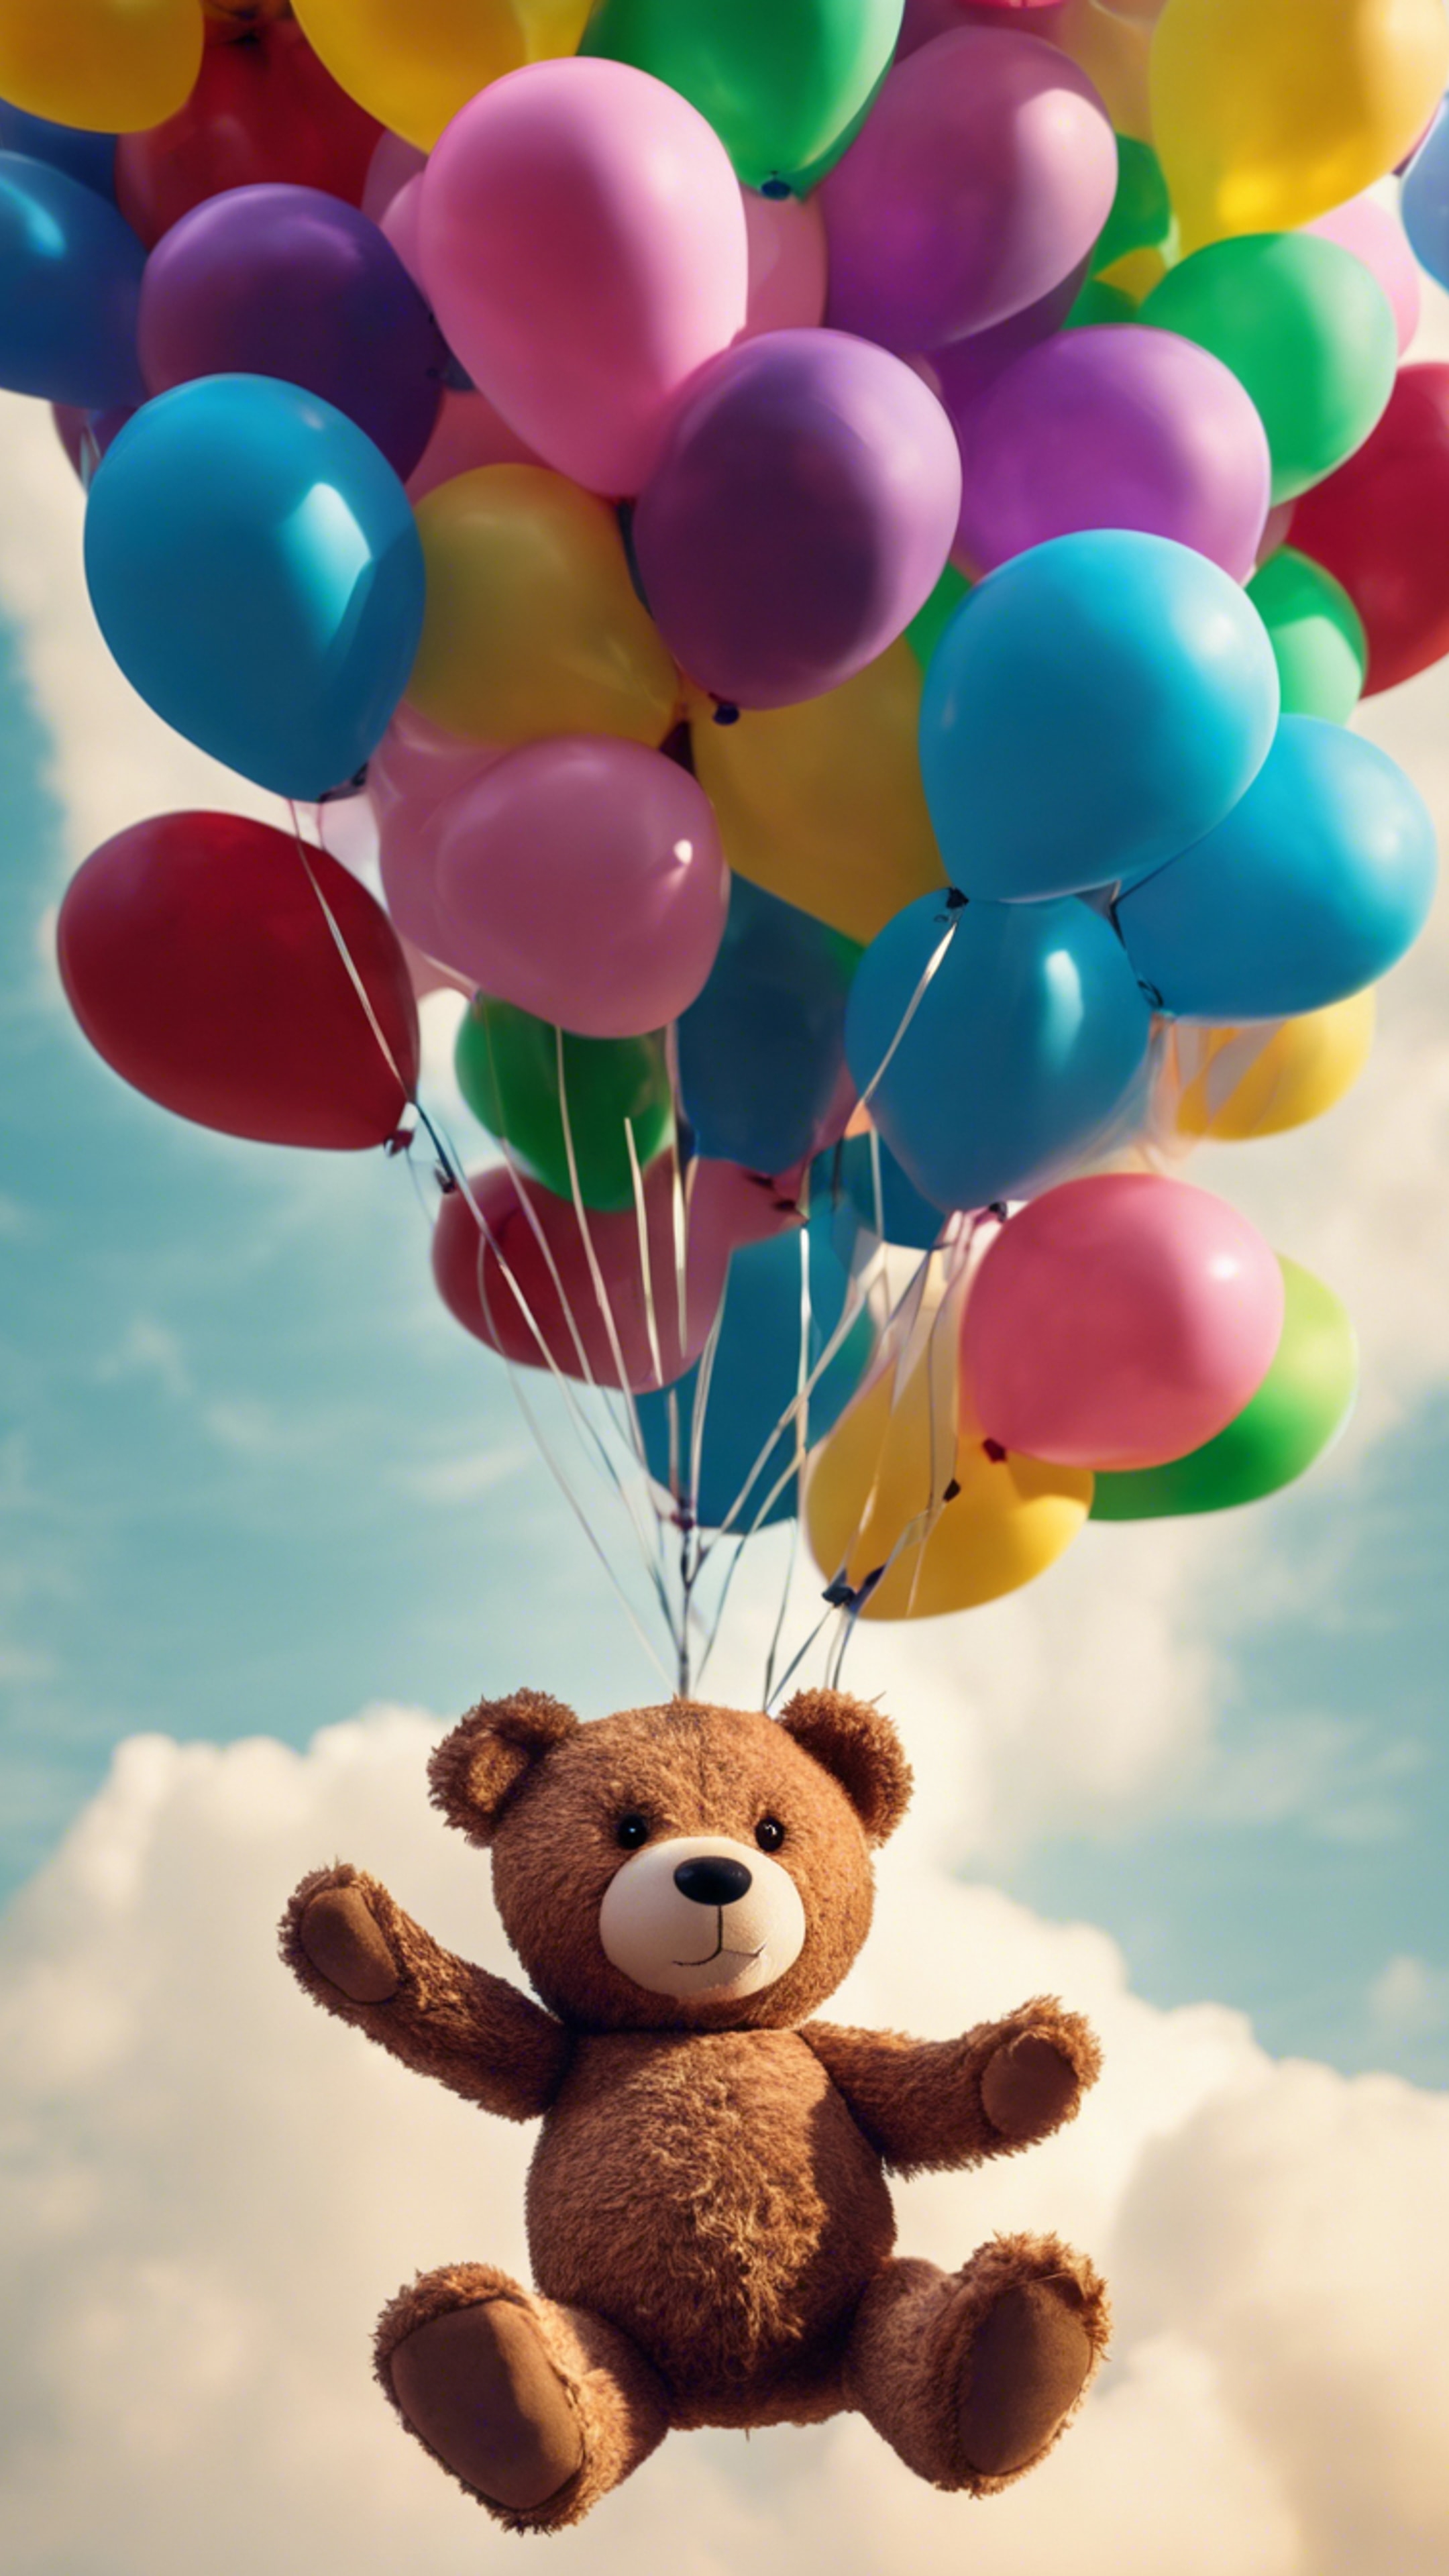 A teddy bear floating in the sky suspended to a set of colorful helium balloons. วอลล์เปเปอร์[3cd150b054934ab09e64]